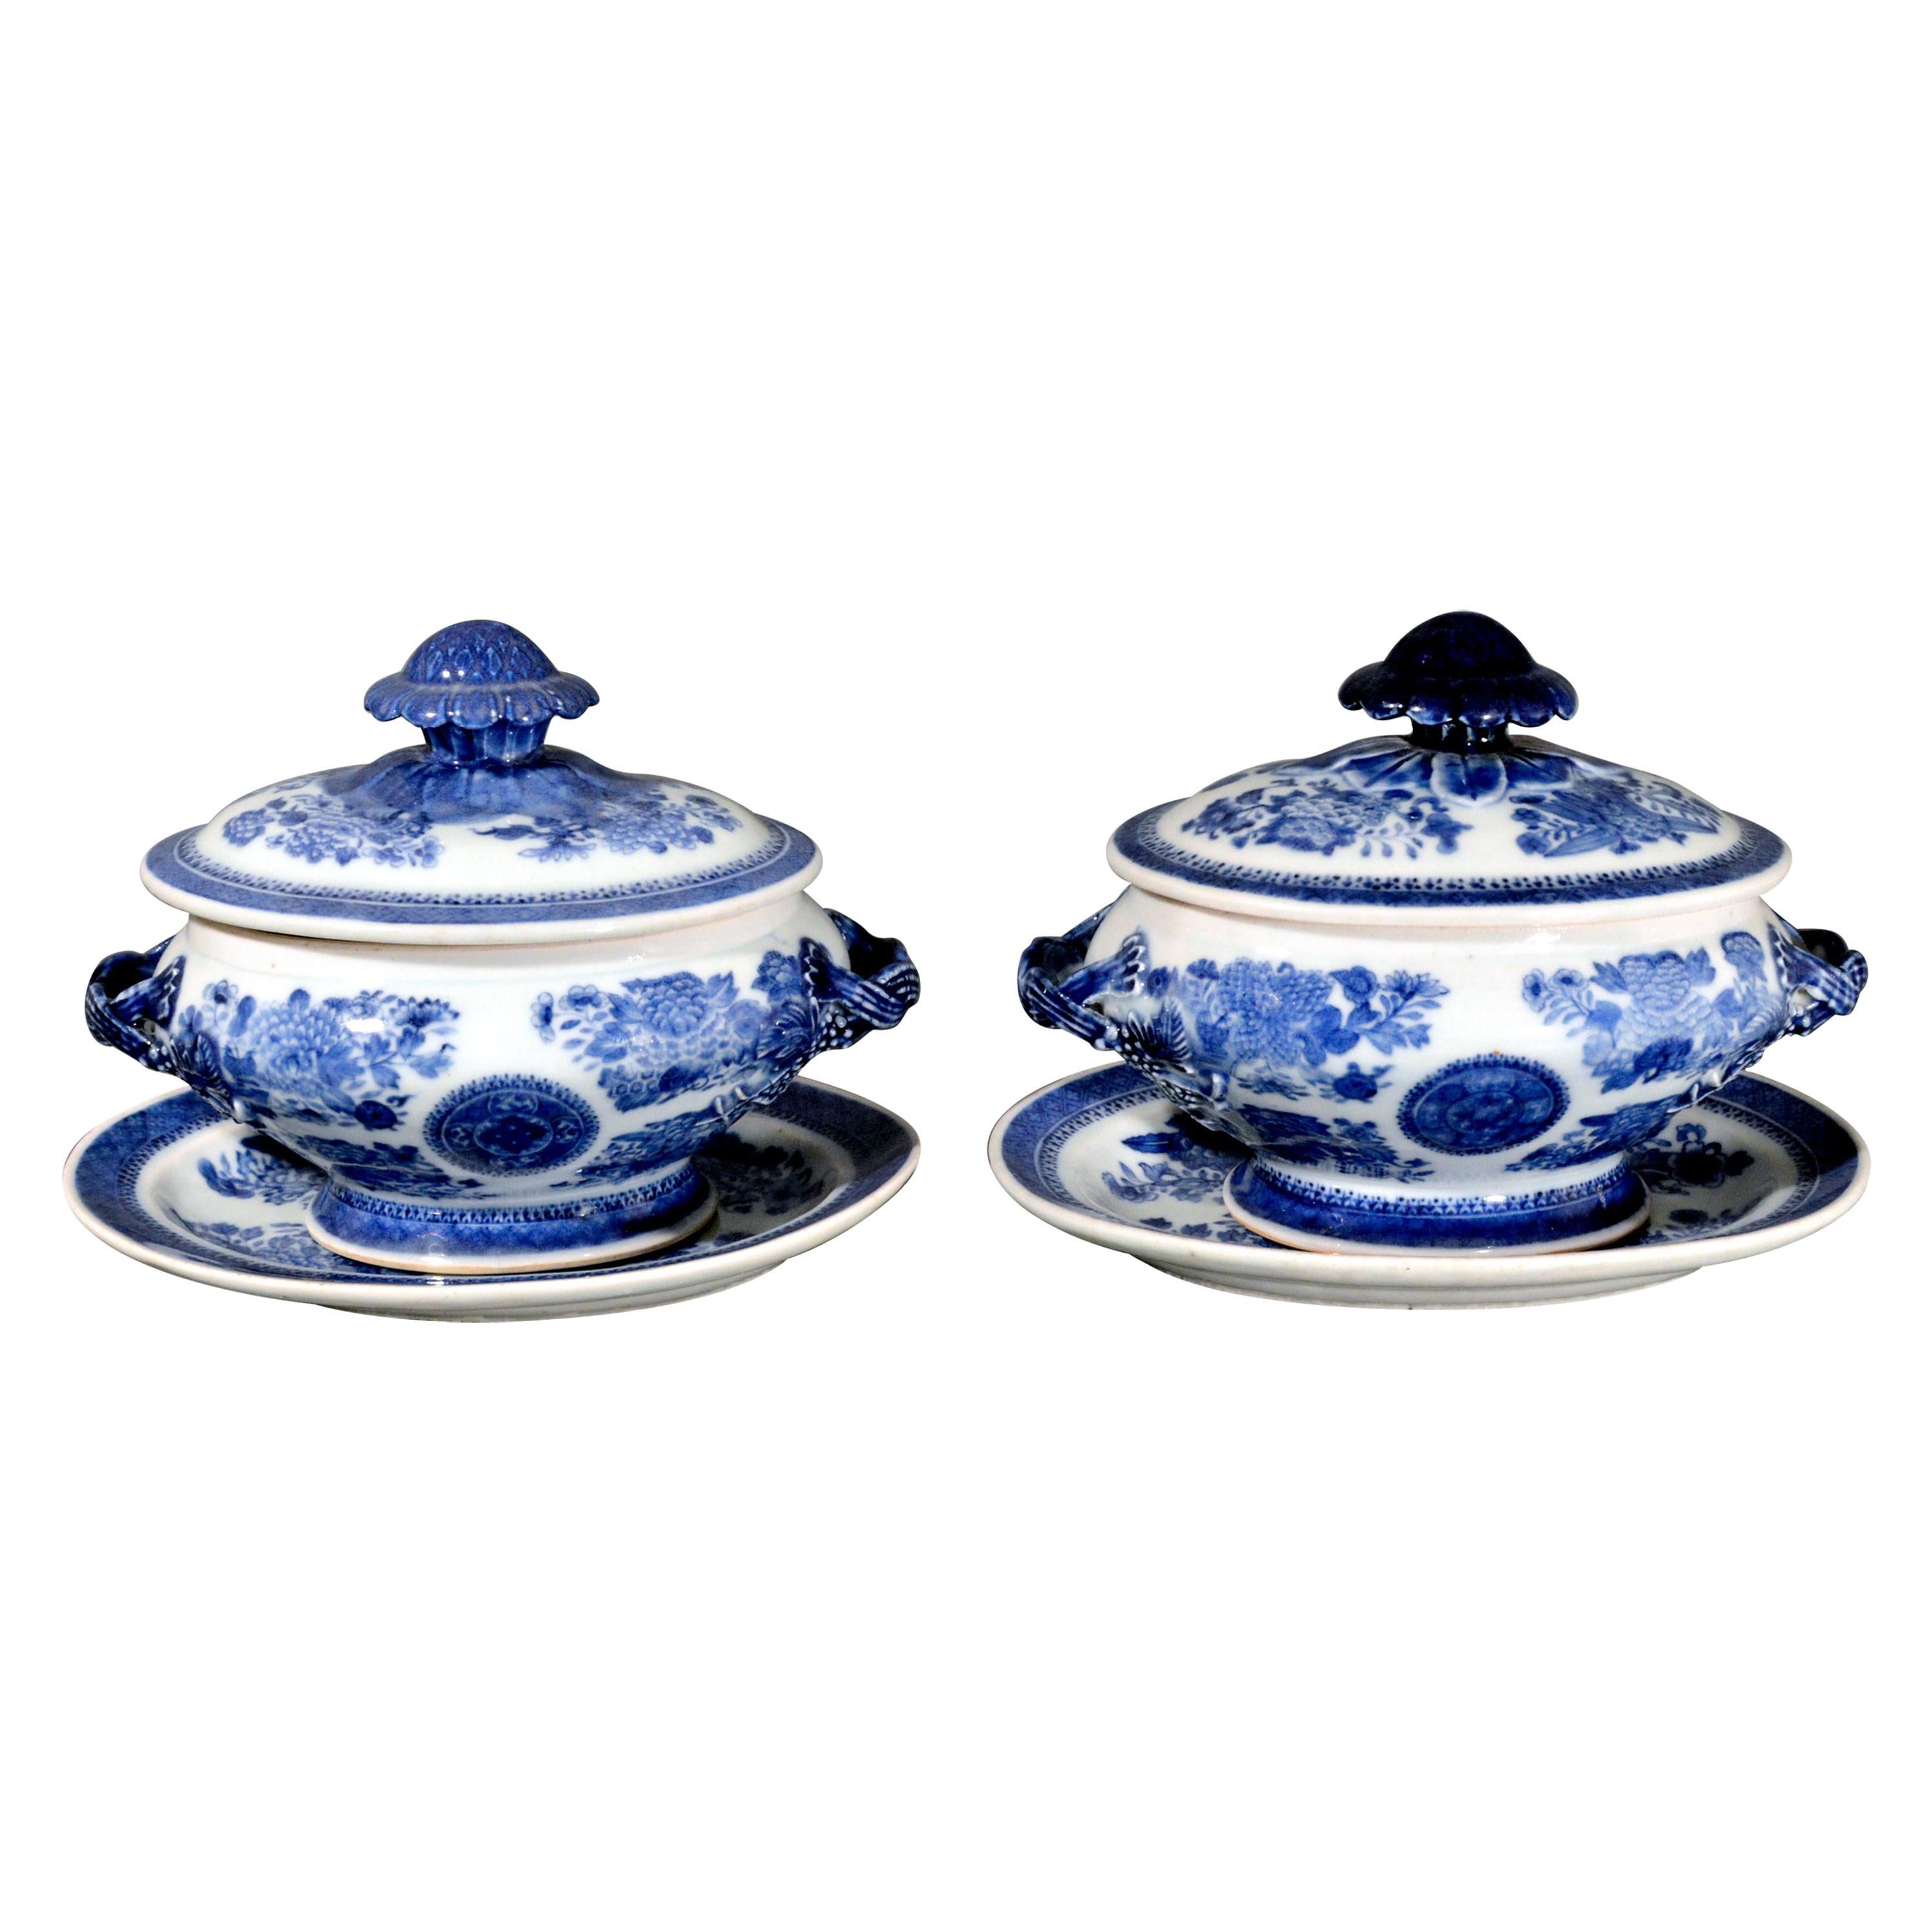 Chinese Export Porcelain Blue Fitzhugh Sauce Tureens, Covers & Stands